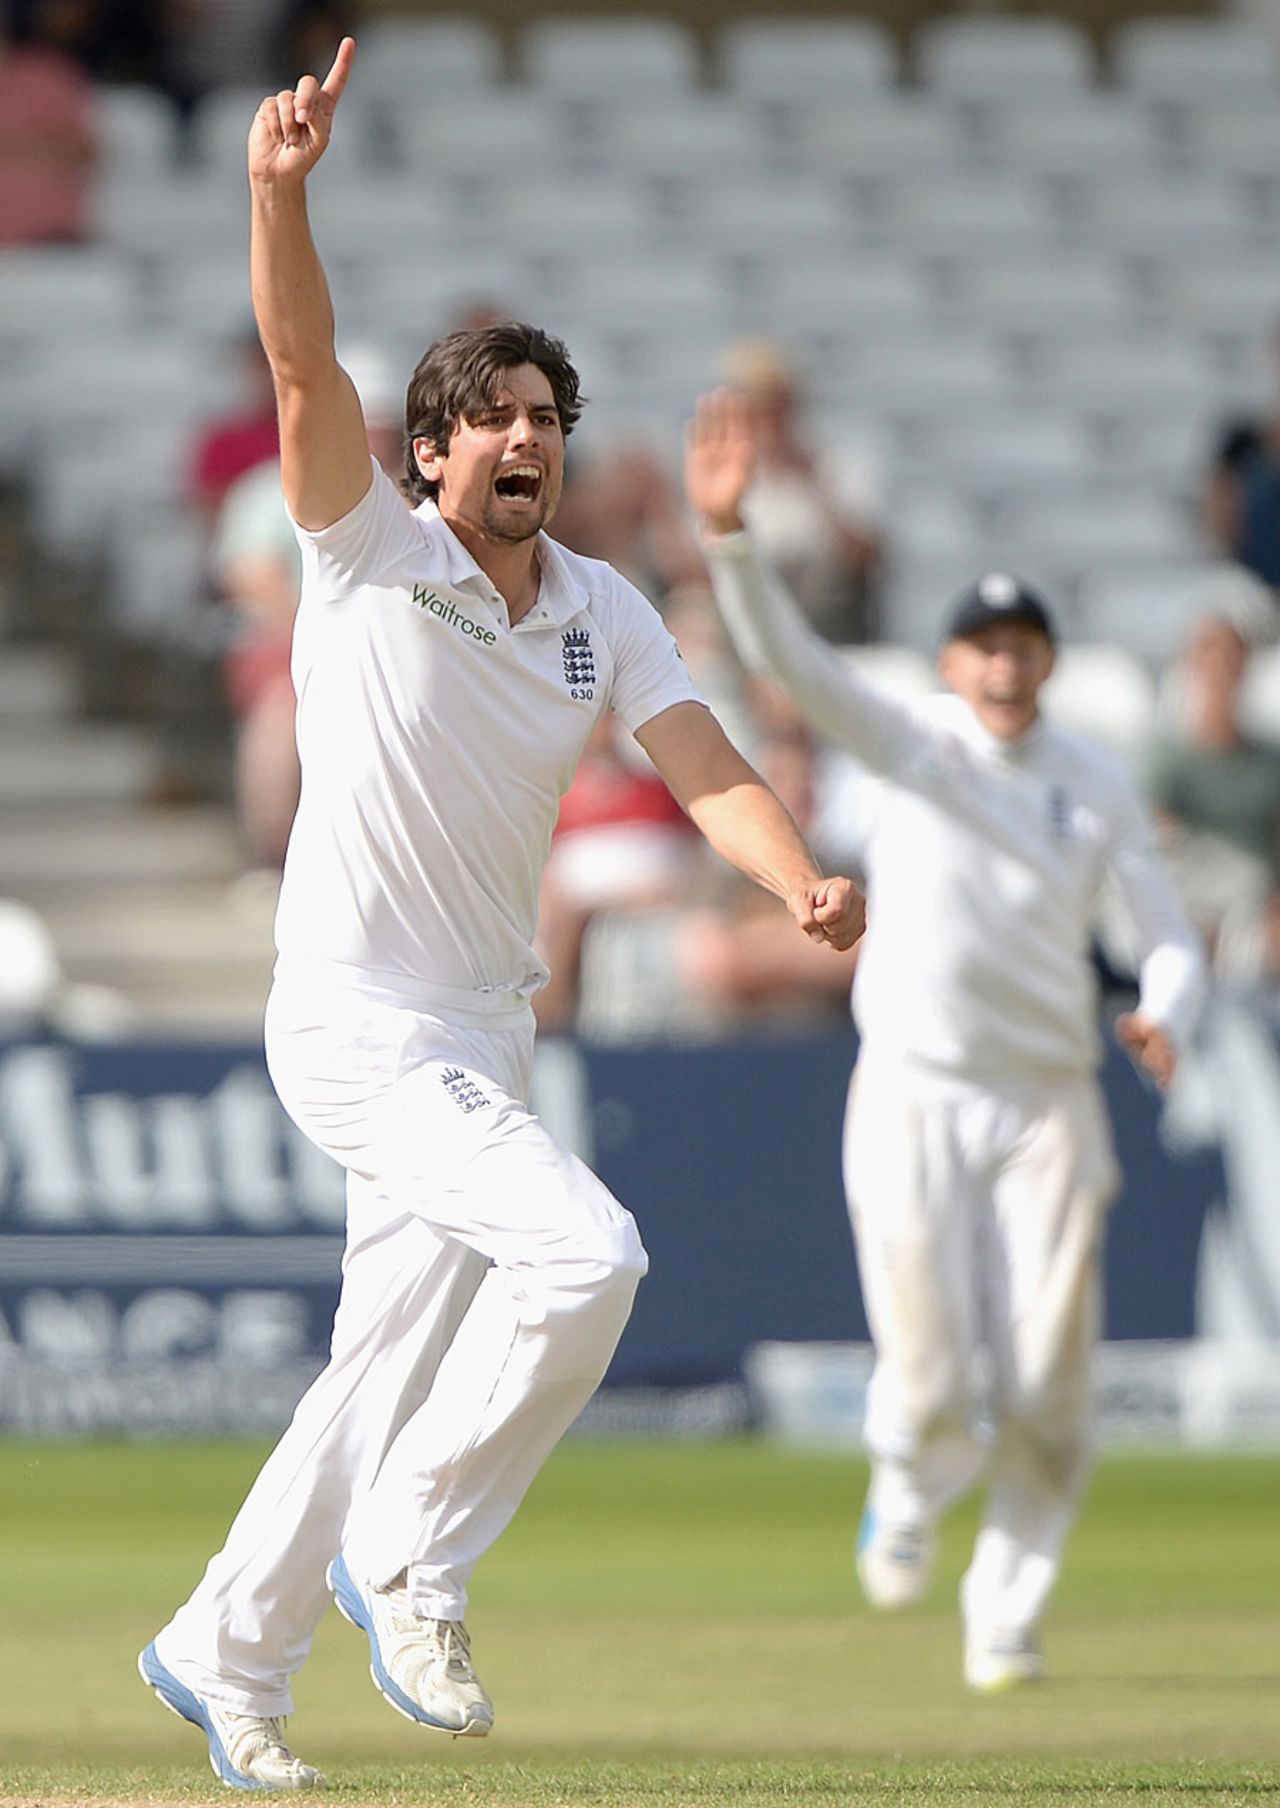 Alastair Cook cannot believe his luck as he picks up a wicket, England v India, 1st Investec Test, Trent Bridge, 5th day, July 13, 2014